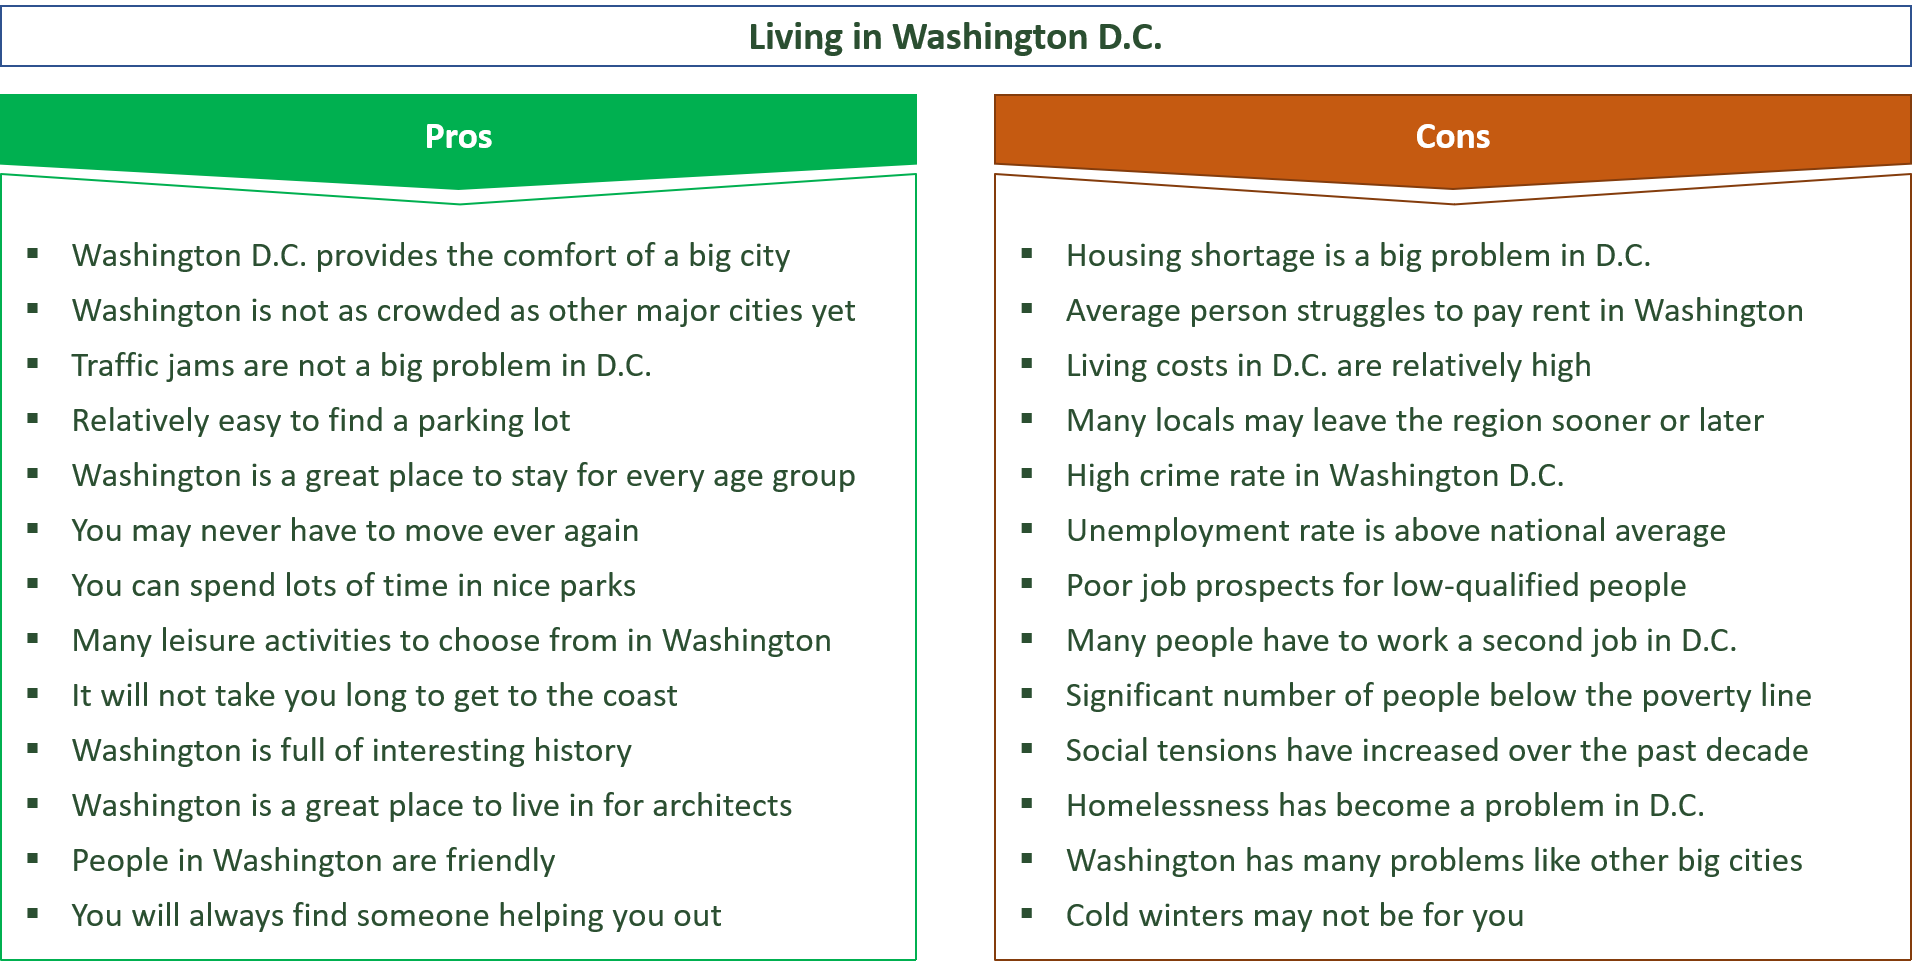 advantages and disadvantages of living in washington d.c.